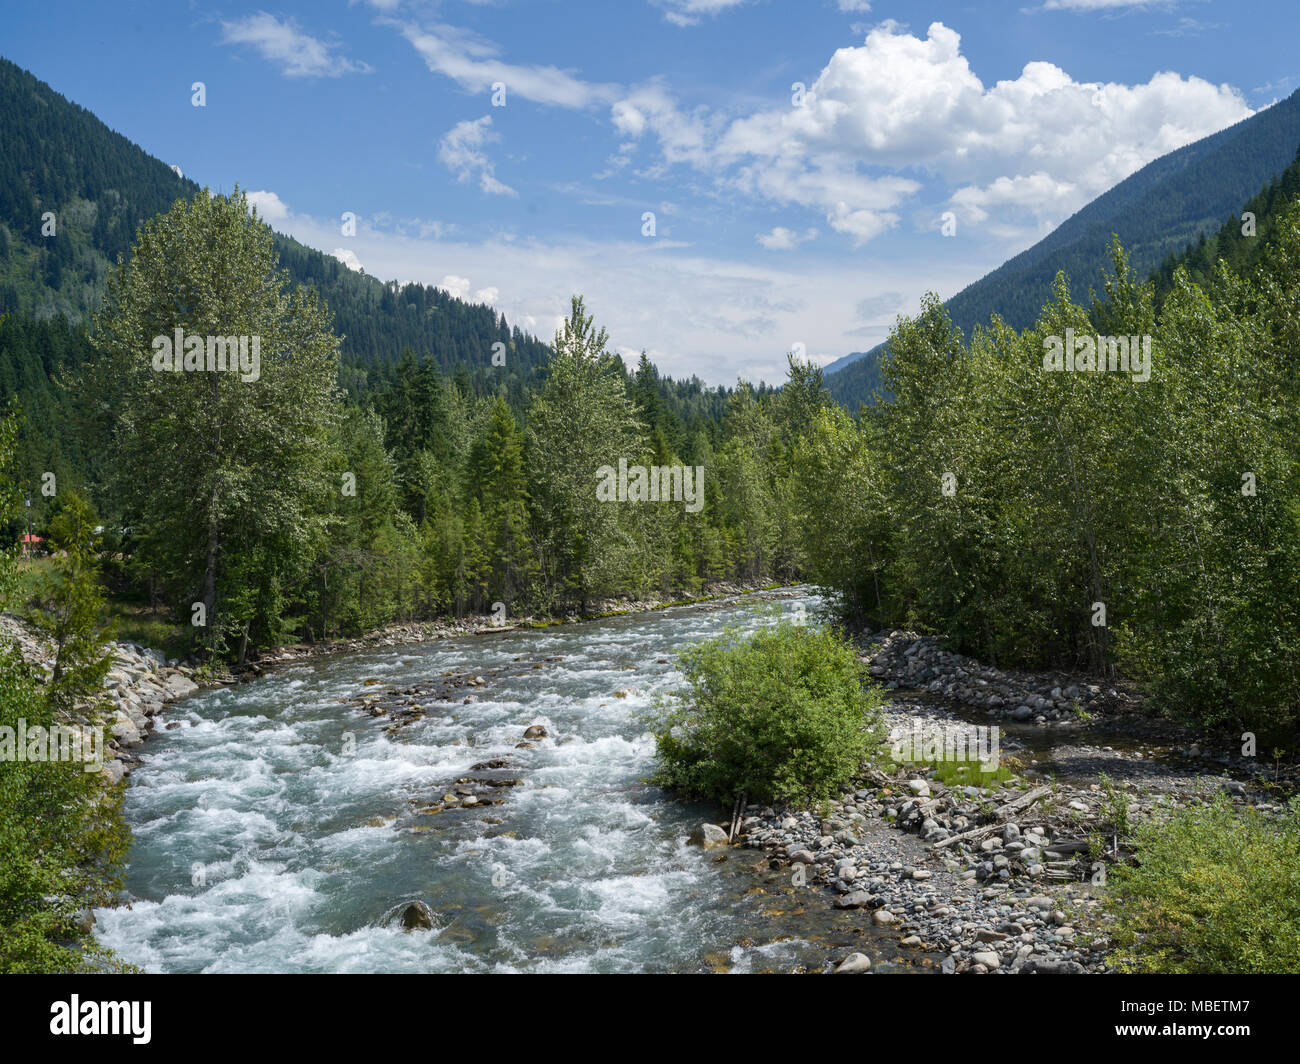 River flowing through forest, Slocan Park, British Columbia, Canada ...